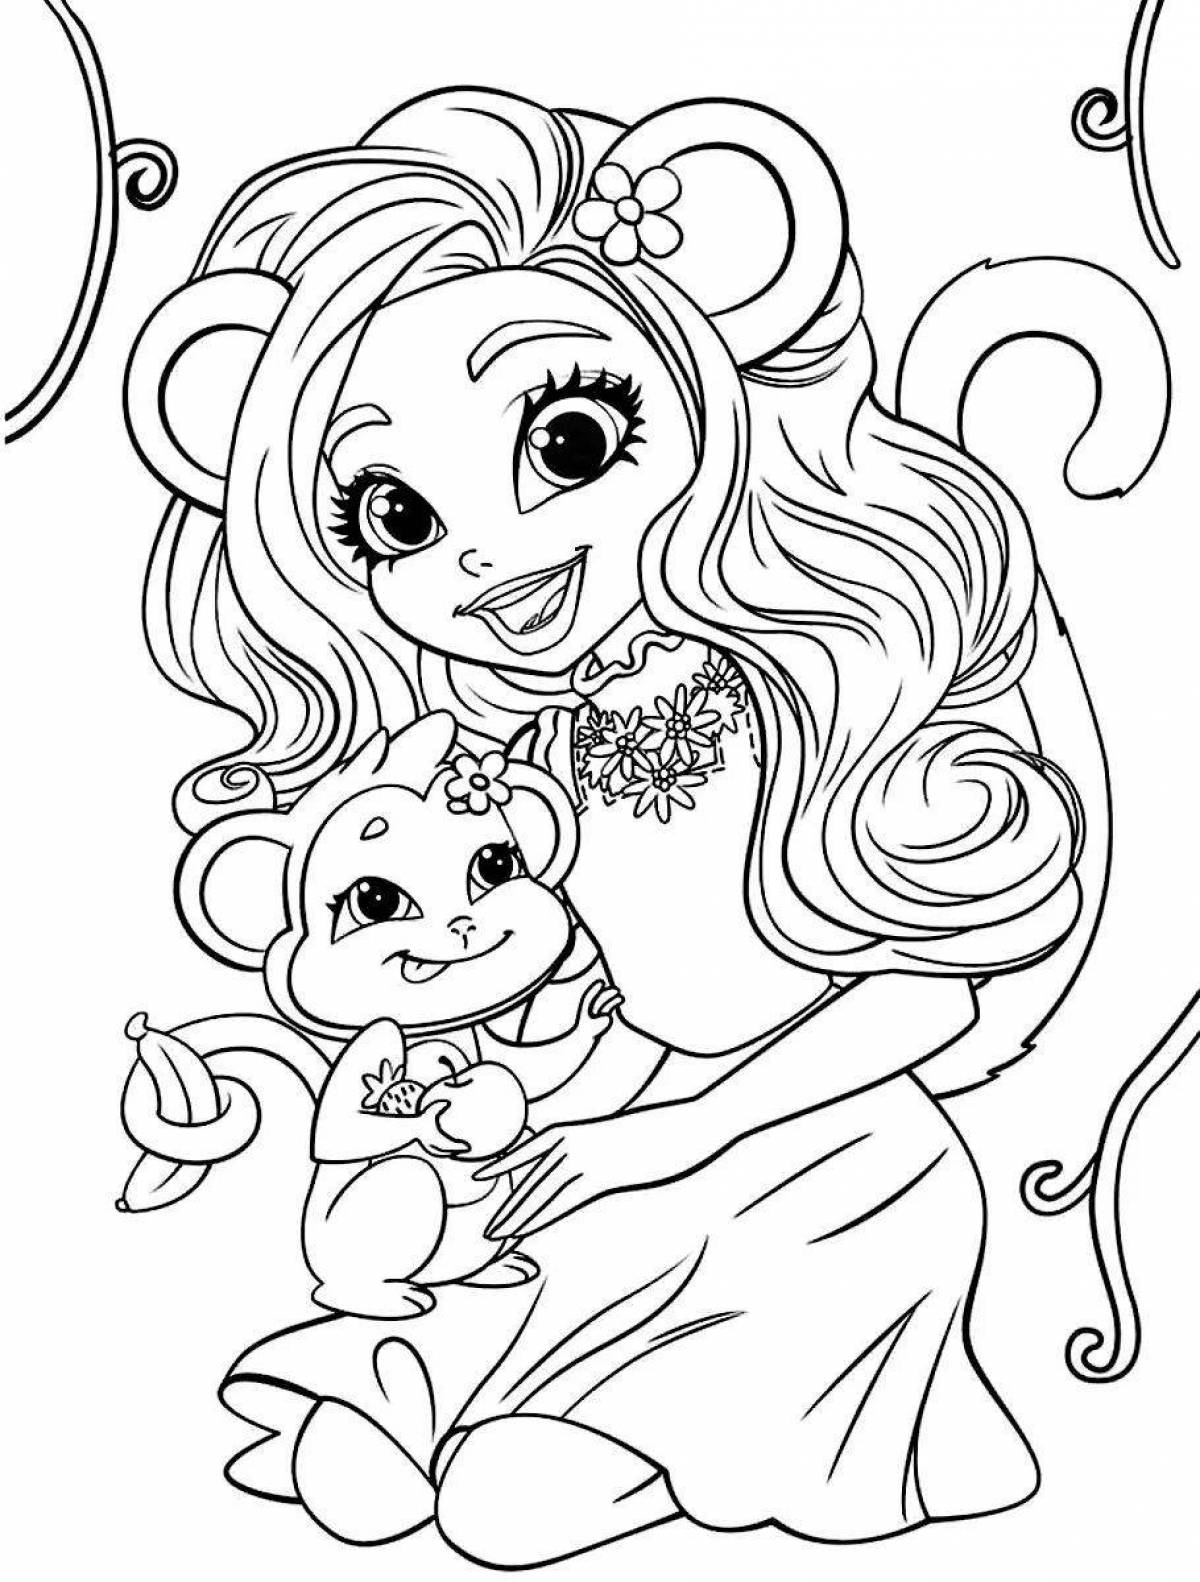 Coloring page enchimala obsessed with flowers